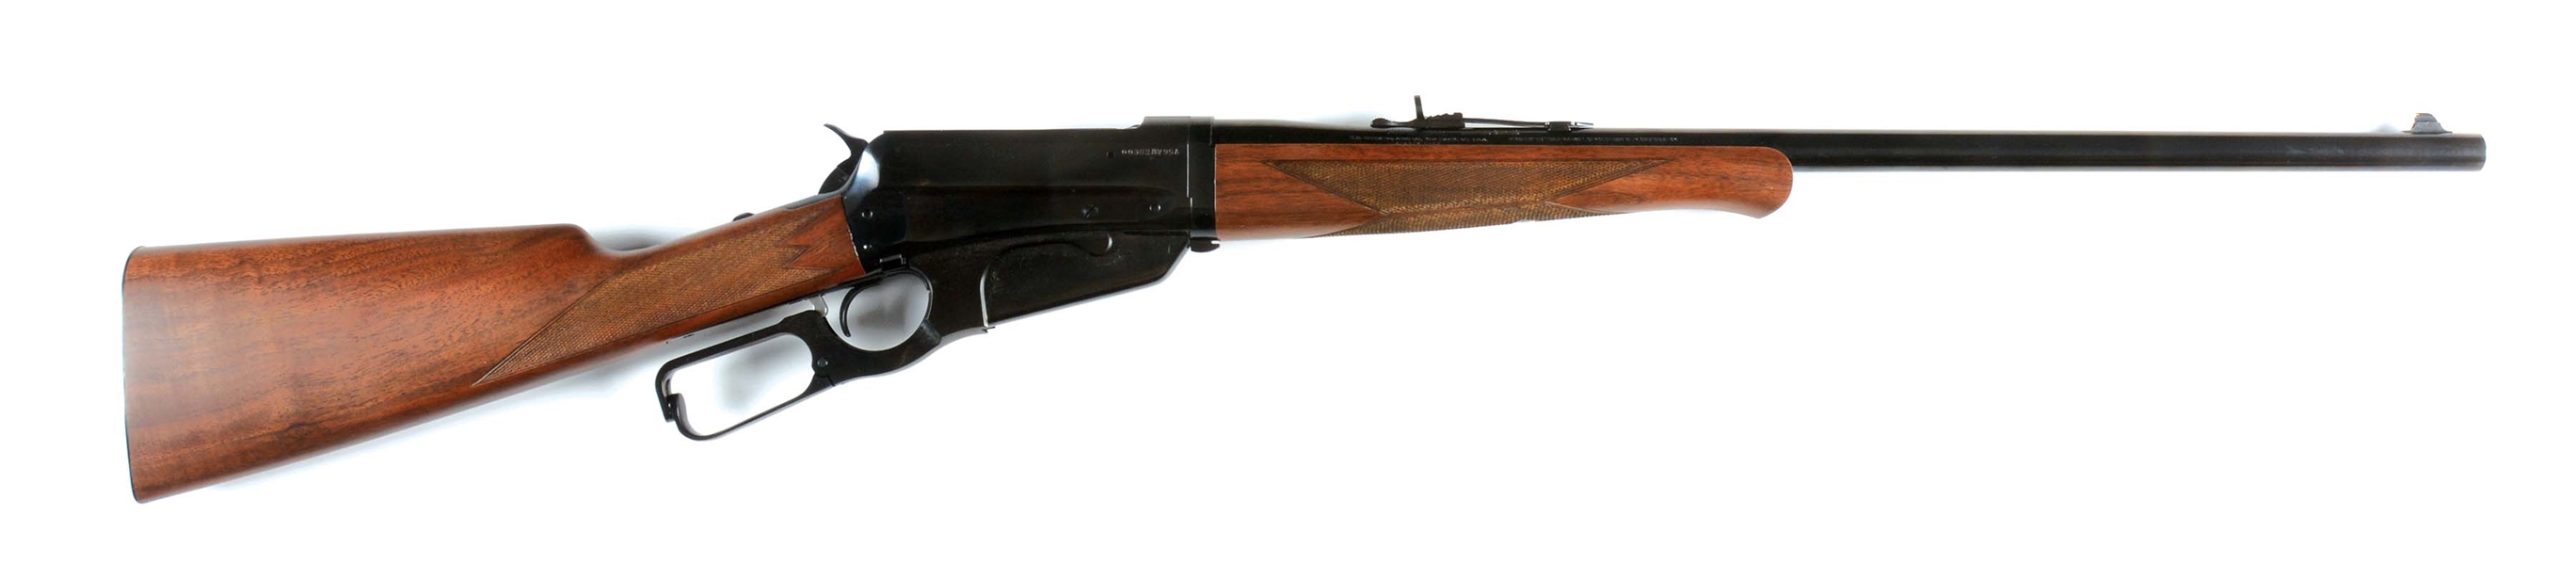 (M) WINCHESTER 95 LEVER ACTION RIFLE.